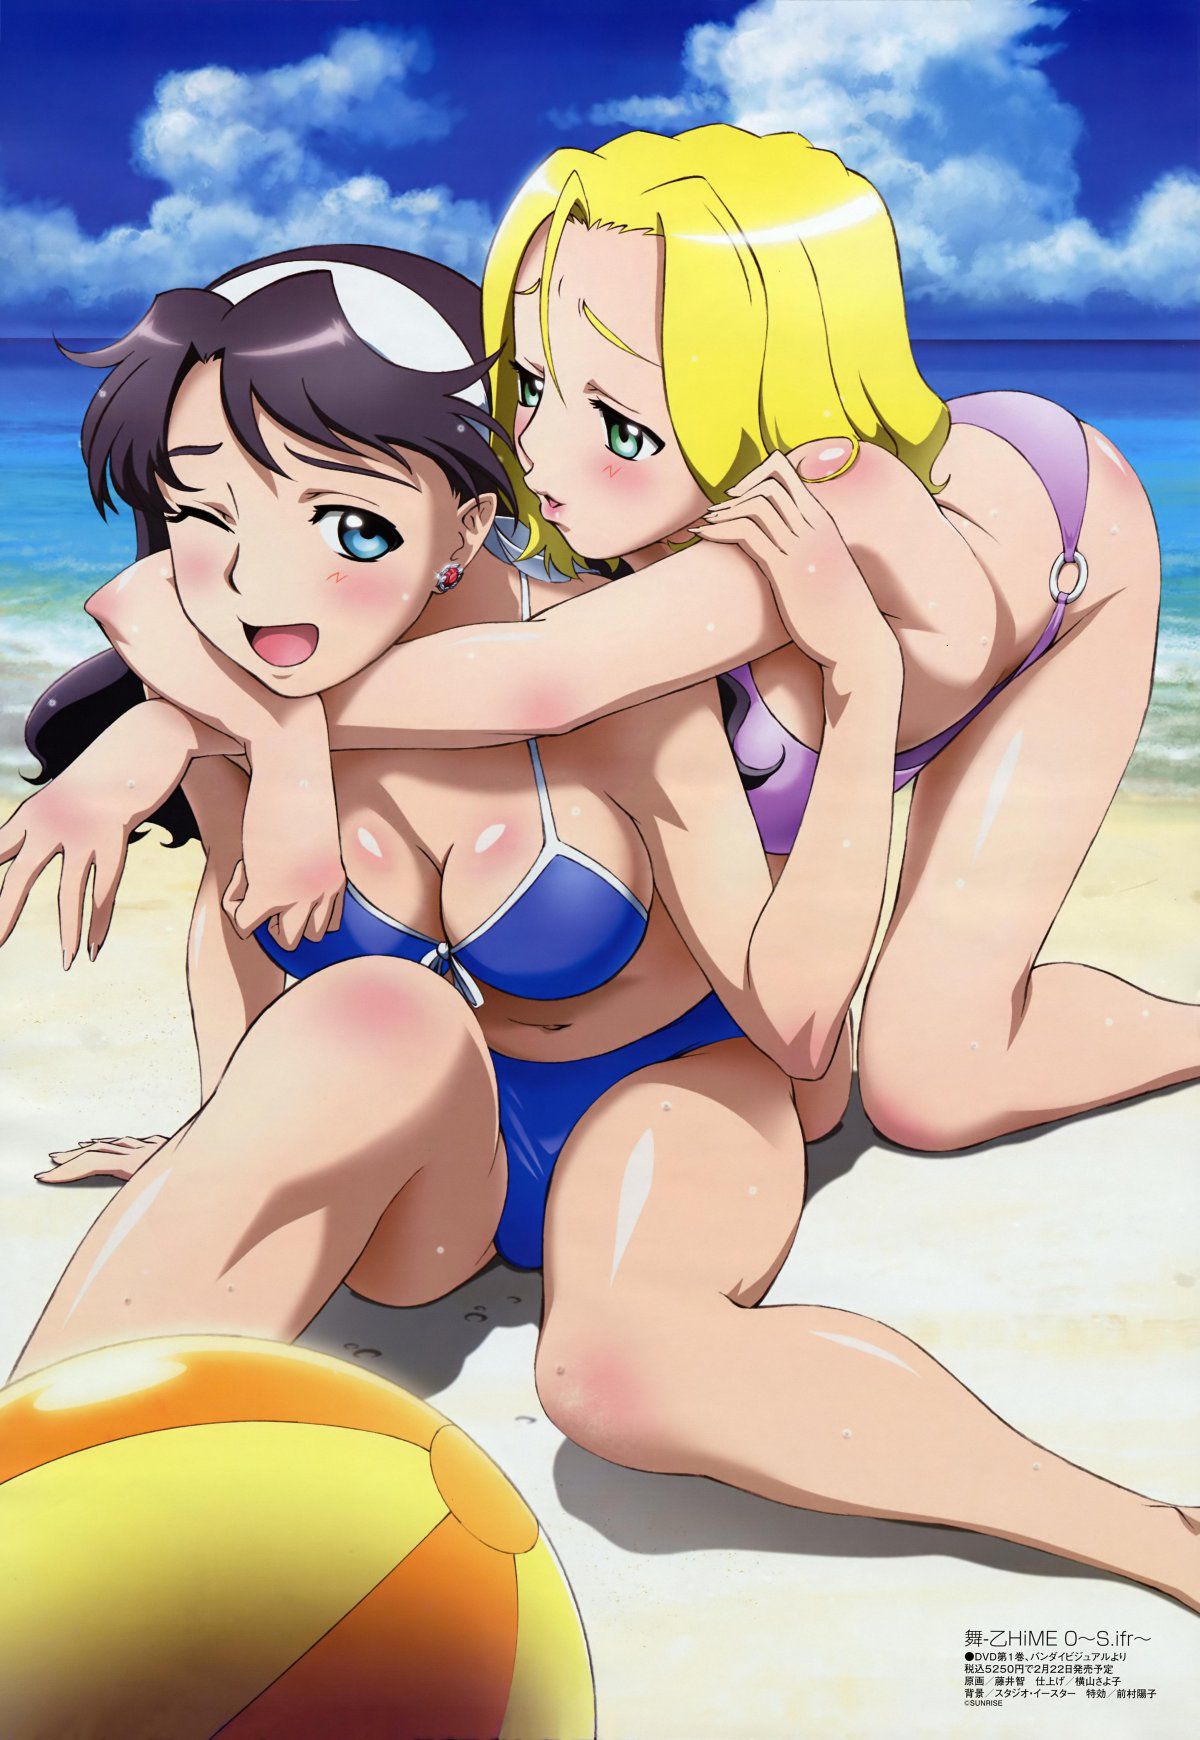 2D Yuri erotic image summary 58 pieces where cute girls are intertwined with kunzururere 25